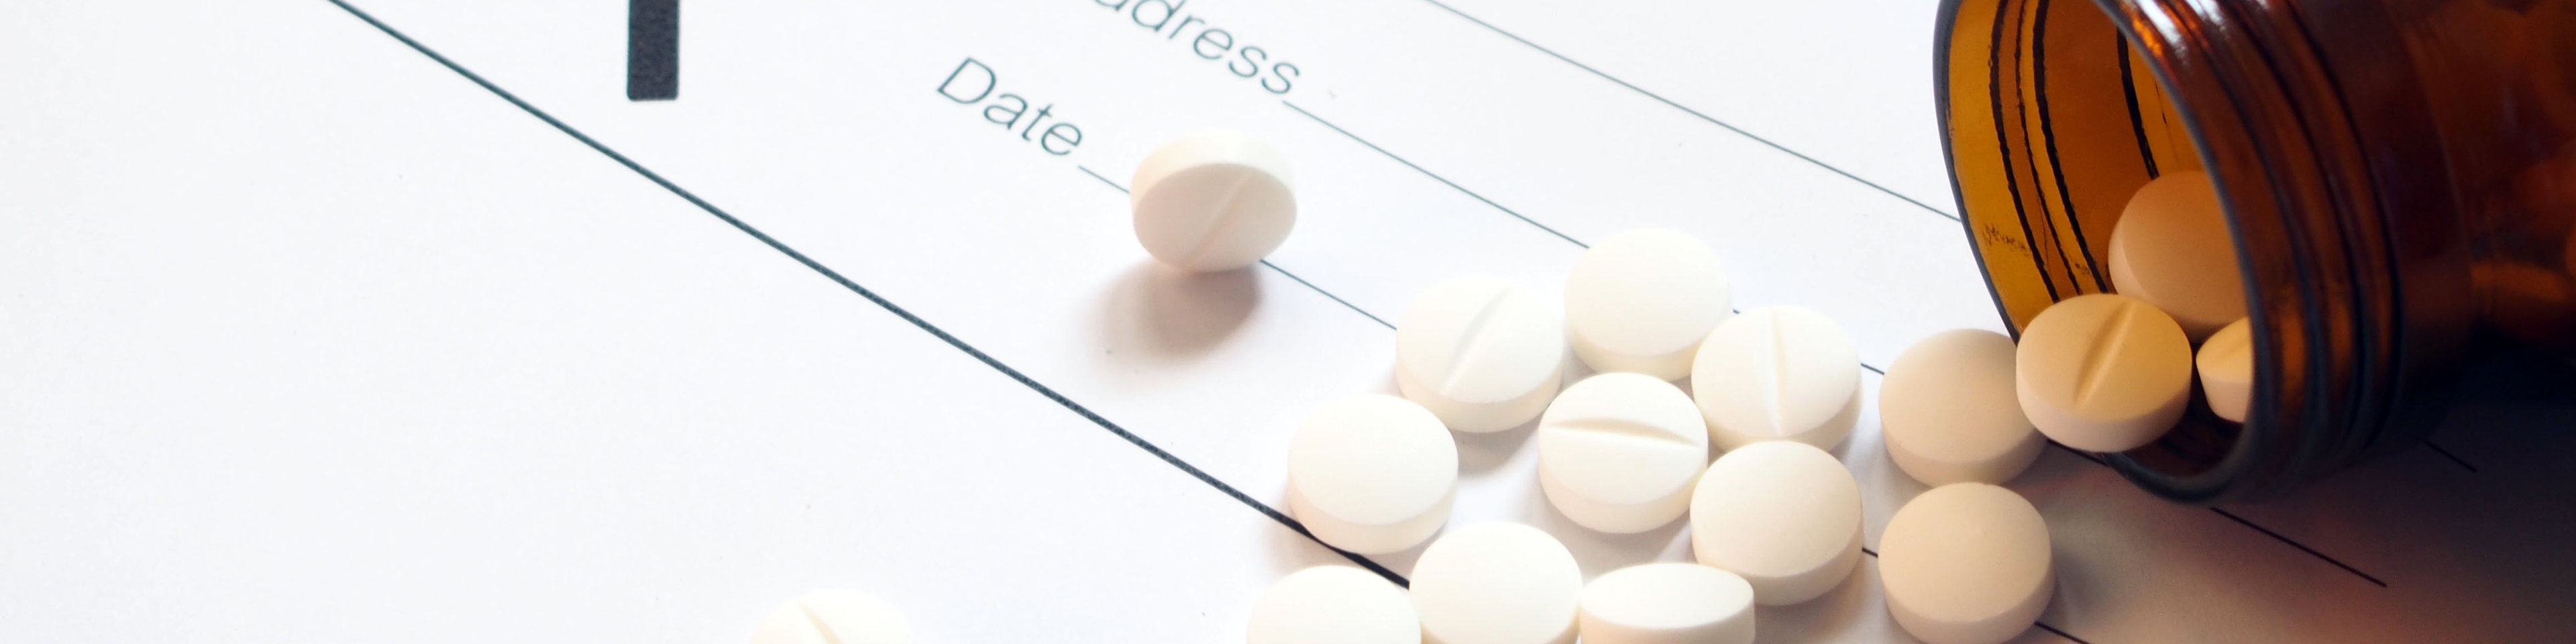 White tablets spilling out of brown glass bottle with blank Rx prescription form on wood table